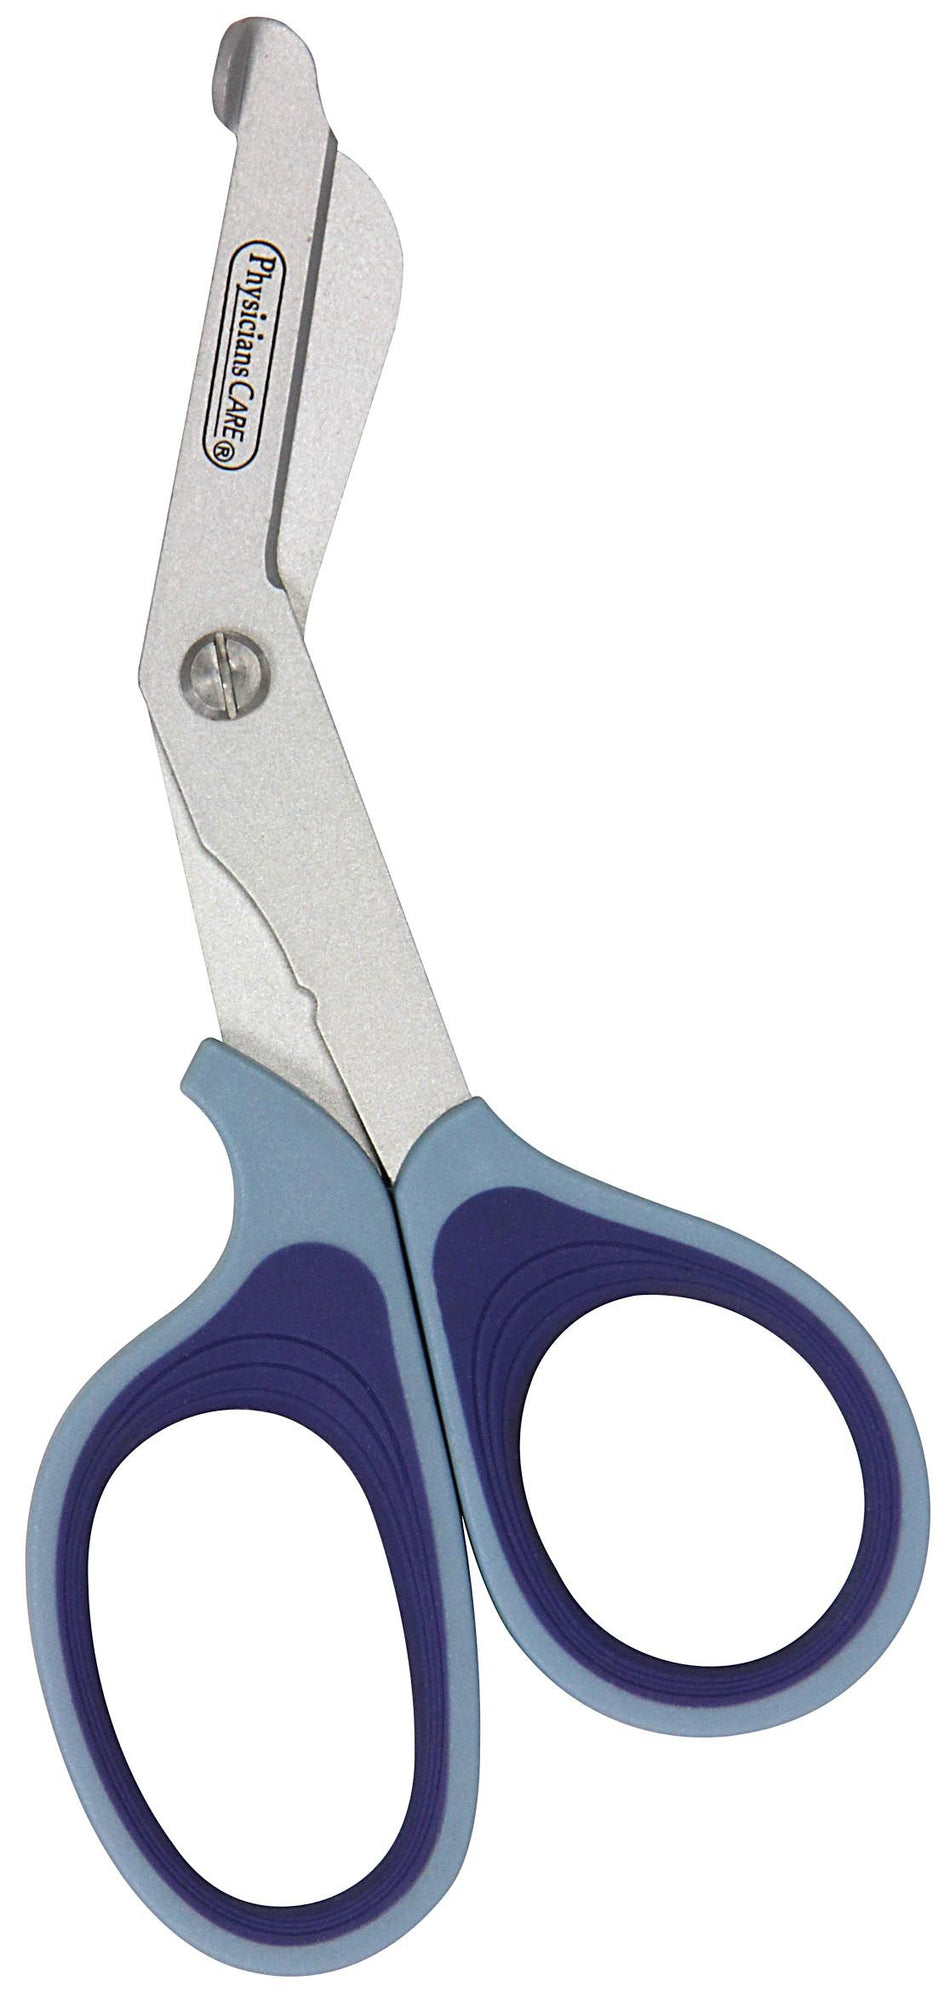 90293-001 First Aid Only 7" Non-Stick Titanium-Bonded Bent Bandage Shears, Blue - Sold per Each